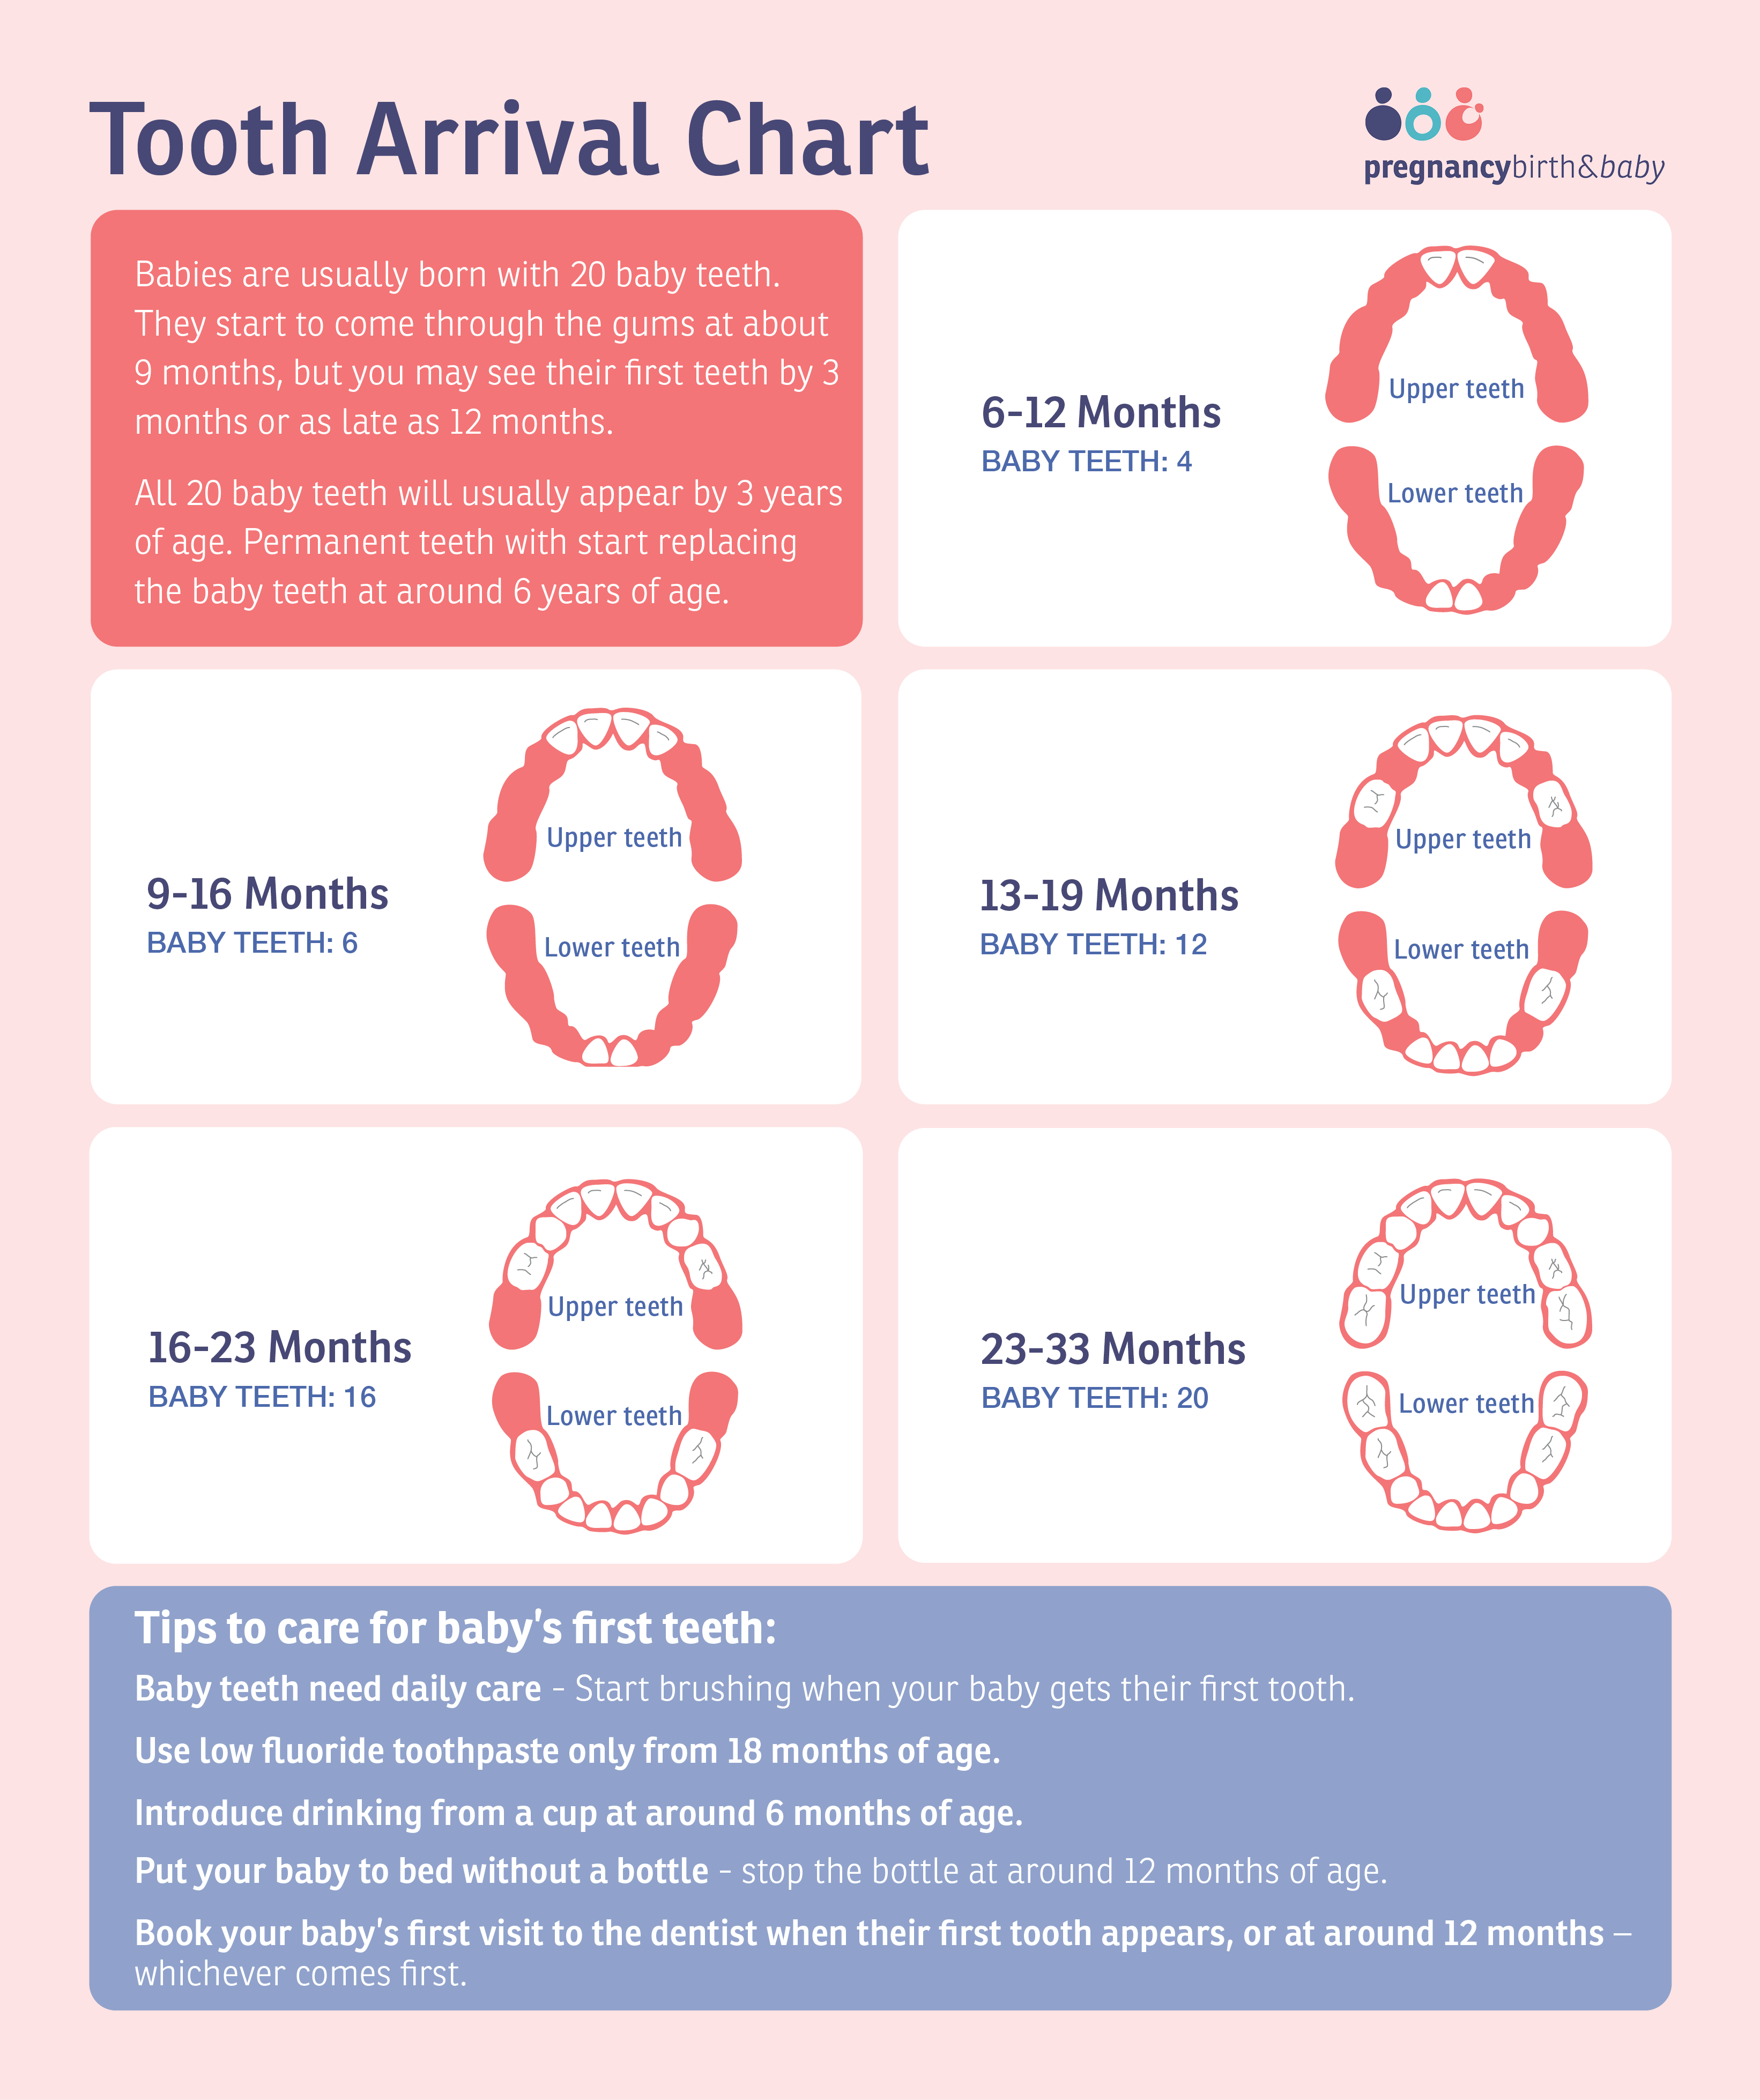 Tooth arrival chart - infographic